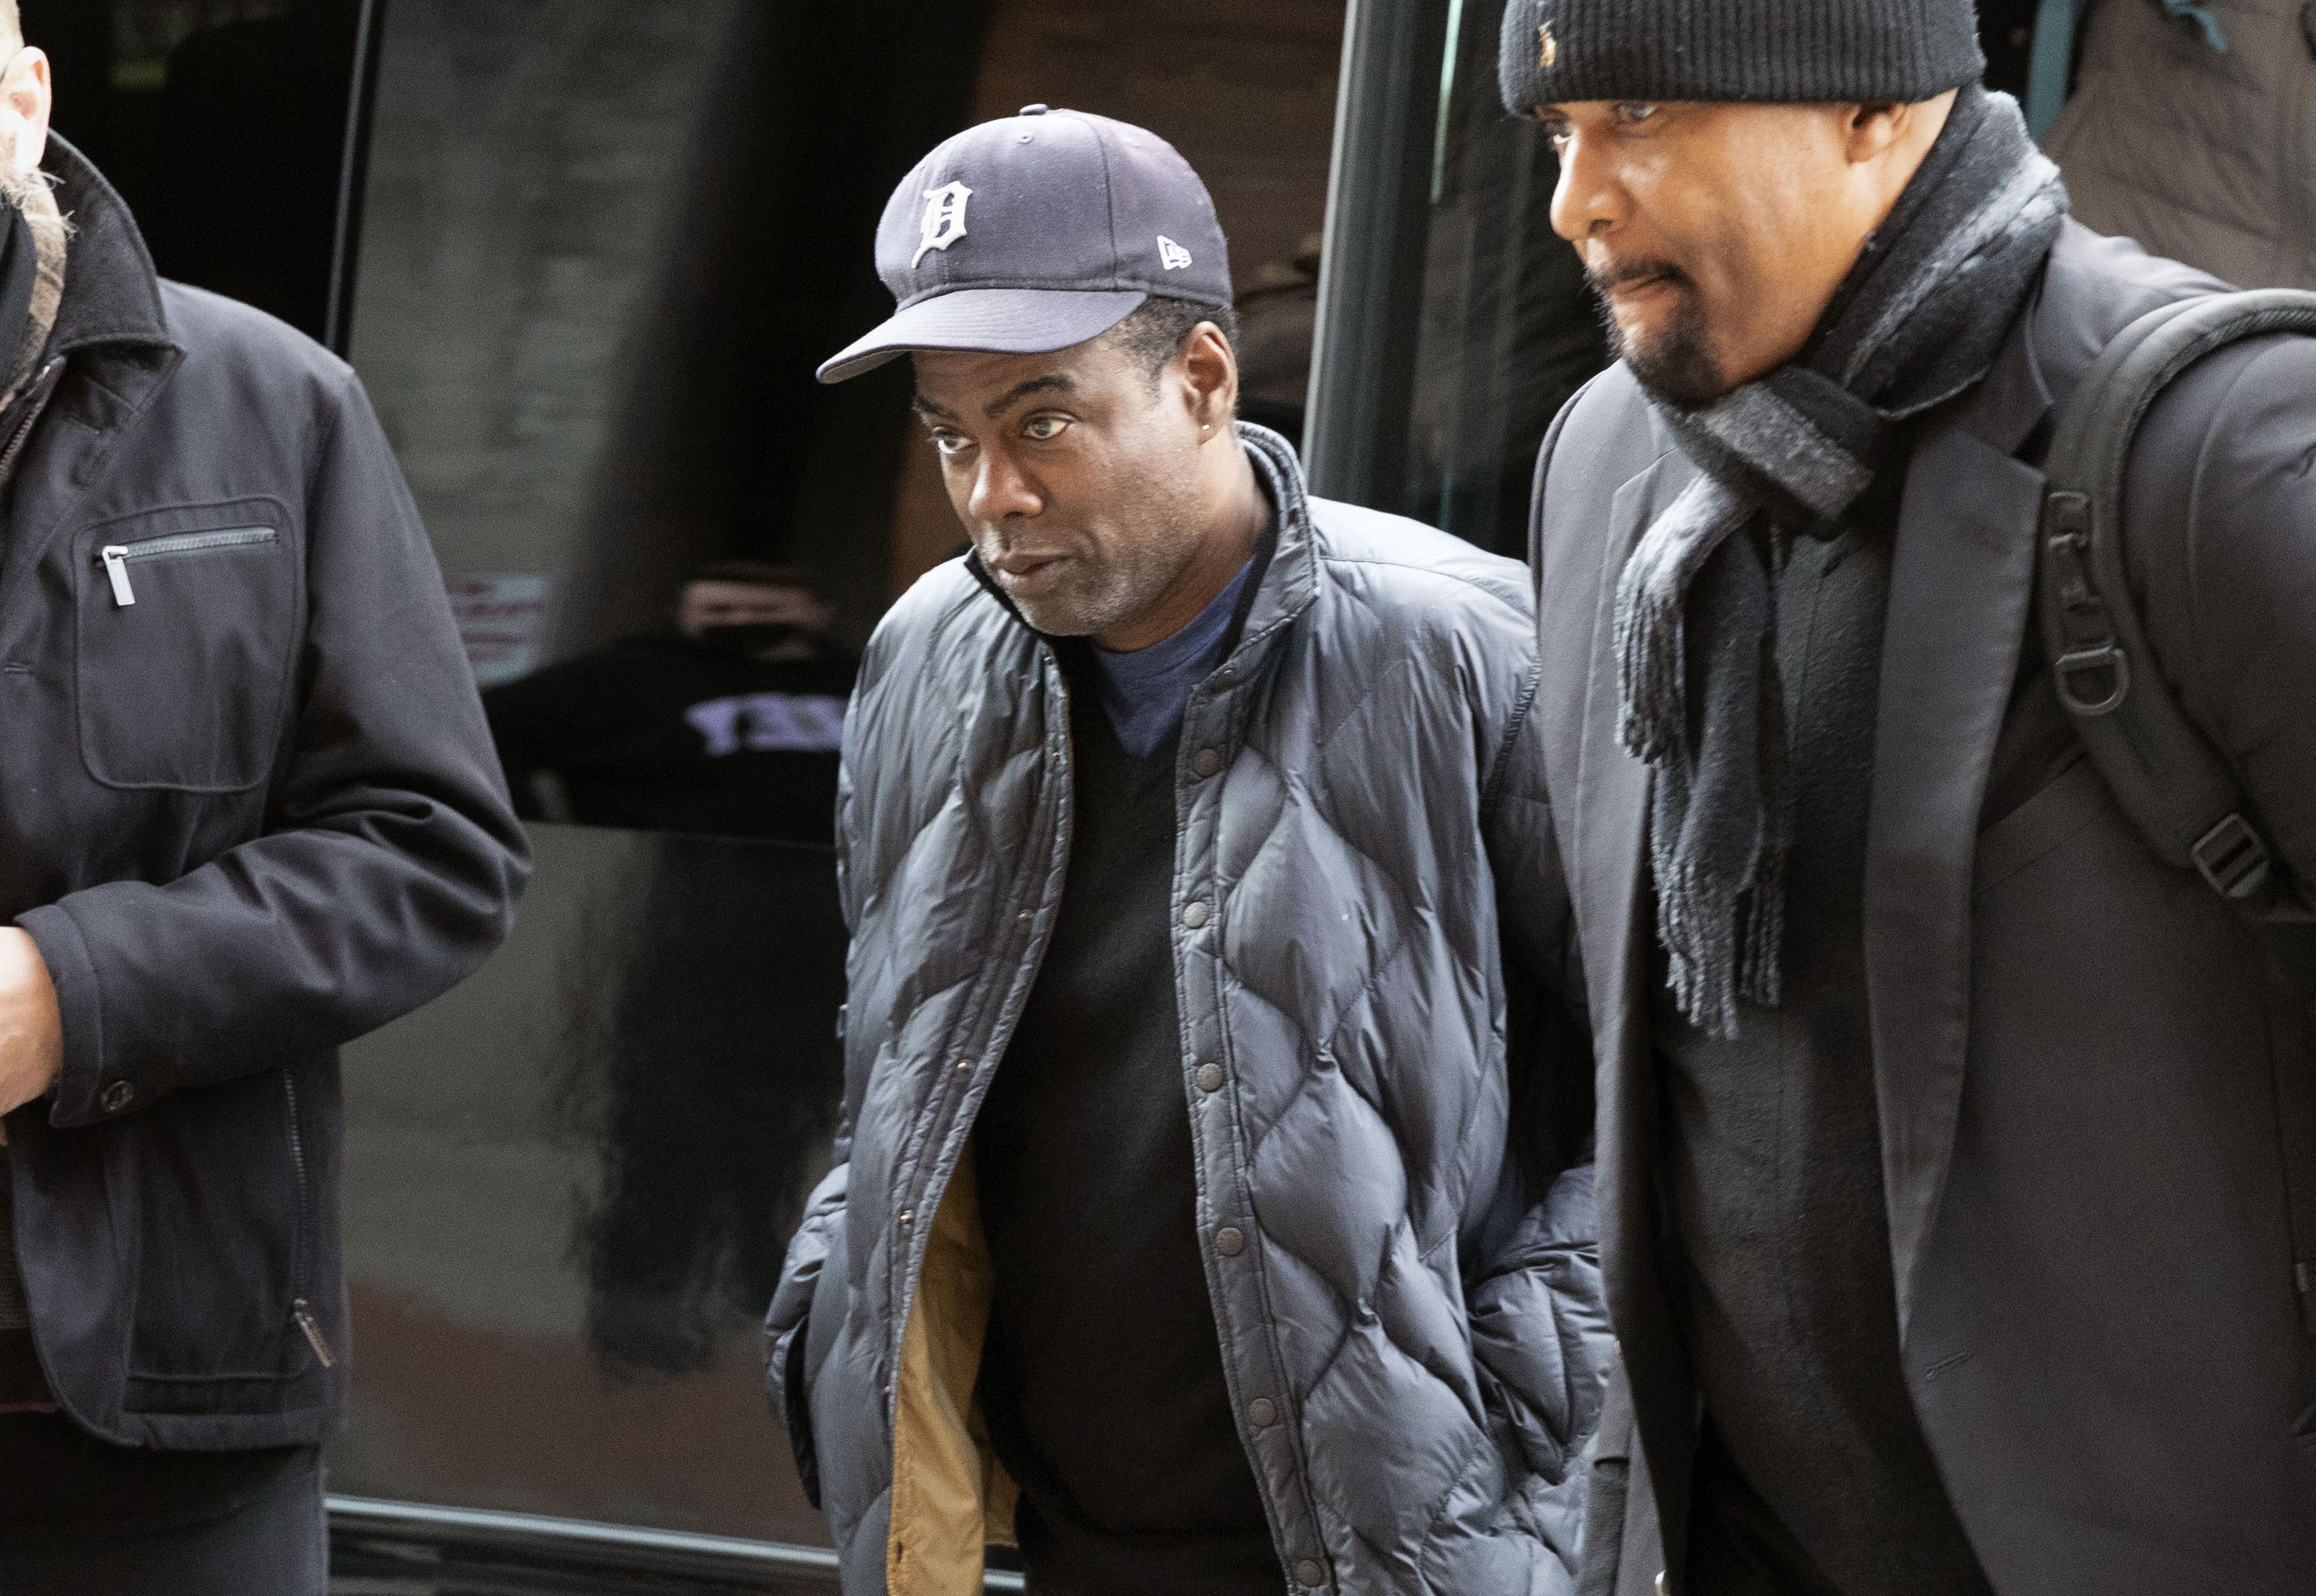 Chris Rock, wearing Detroit Tigers hat, appears on stage for first time  since Oscars slap